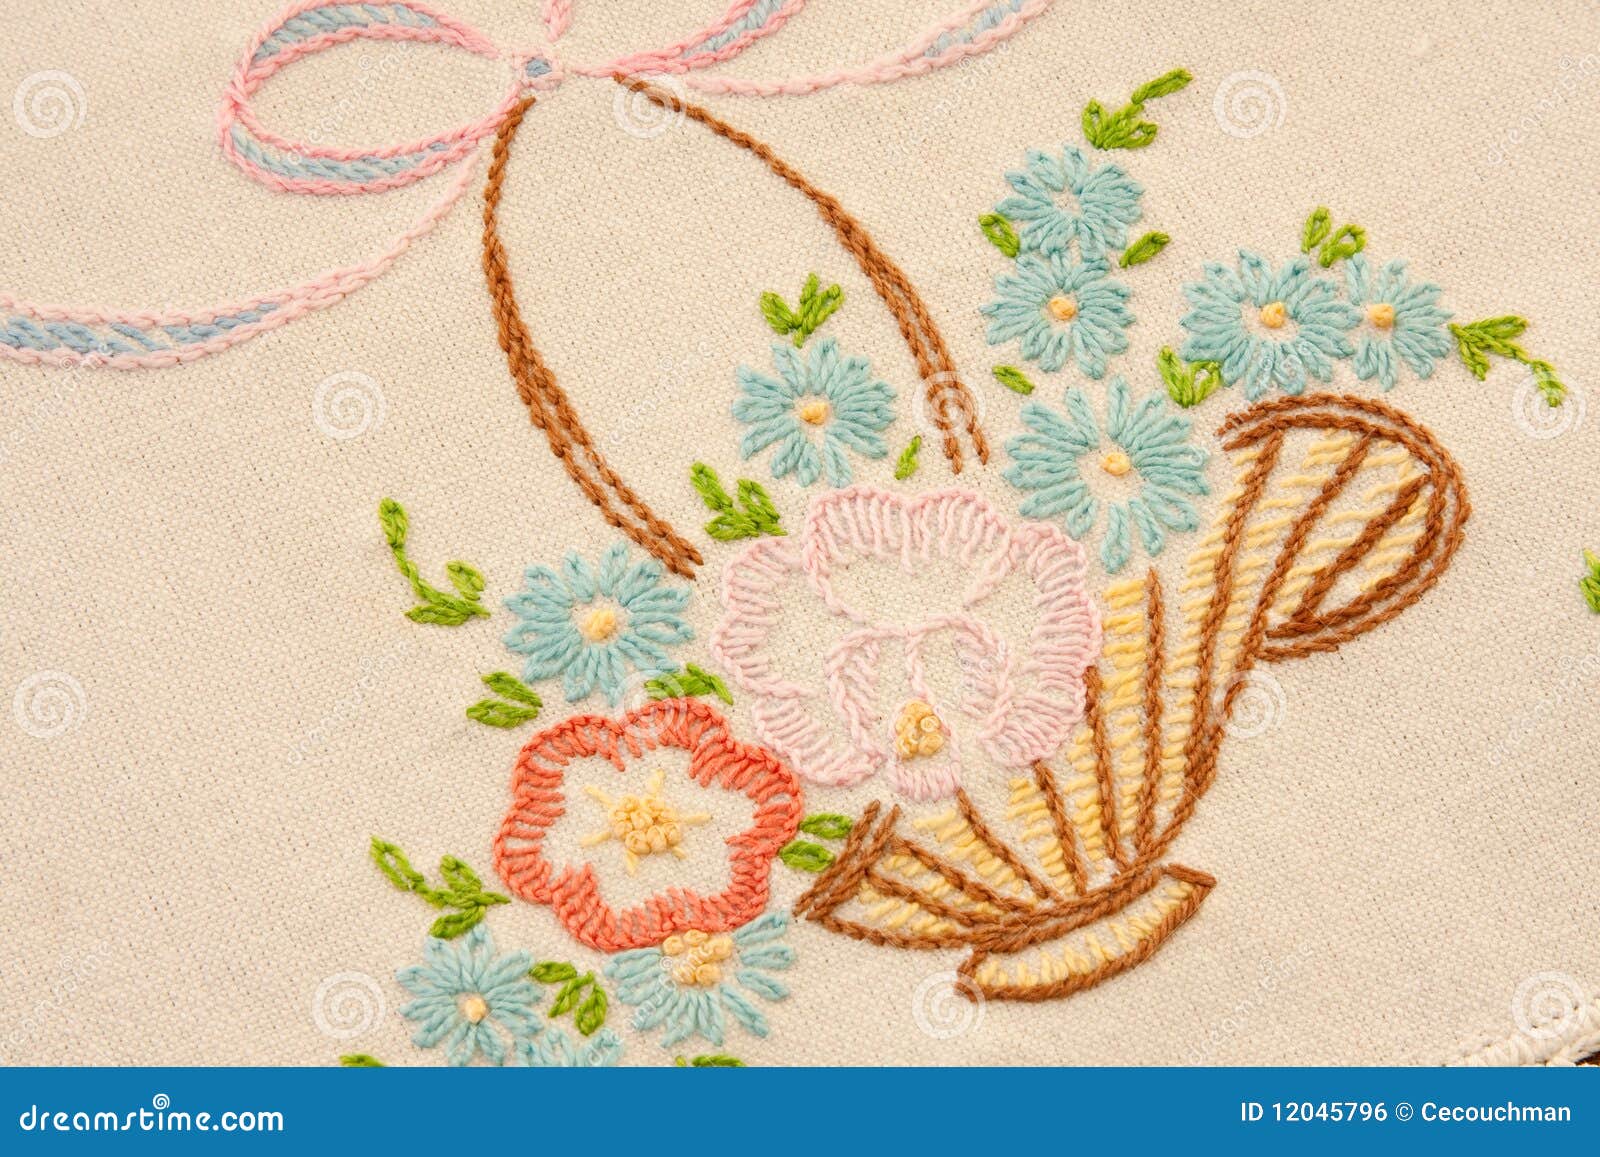 Embroider Detail On Dresser Scarf Stock Photo Image Of Linen